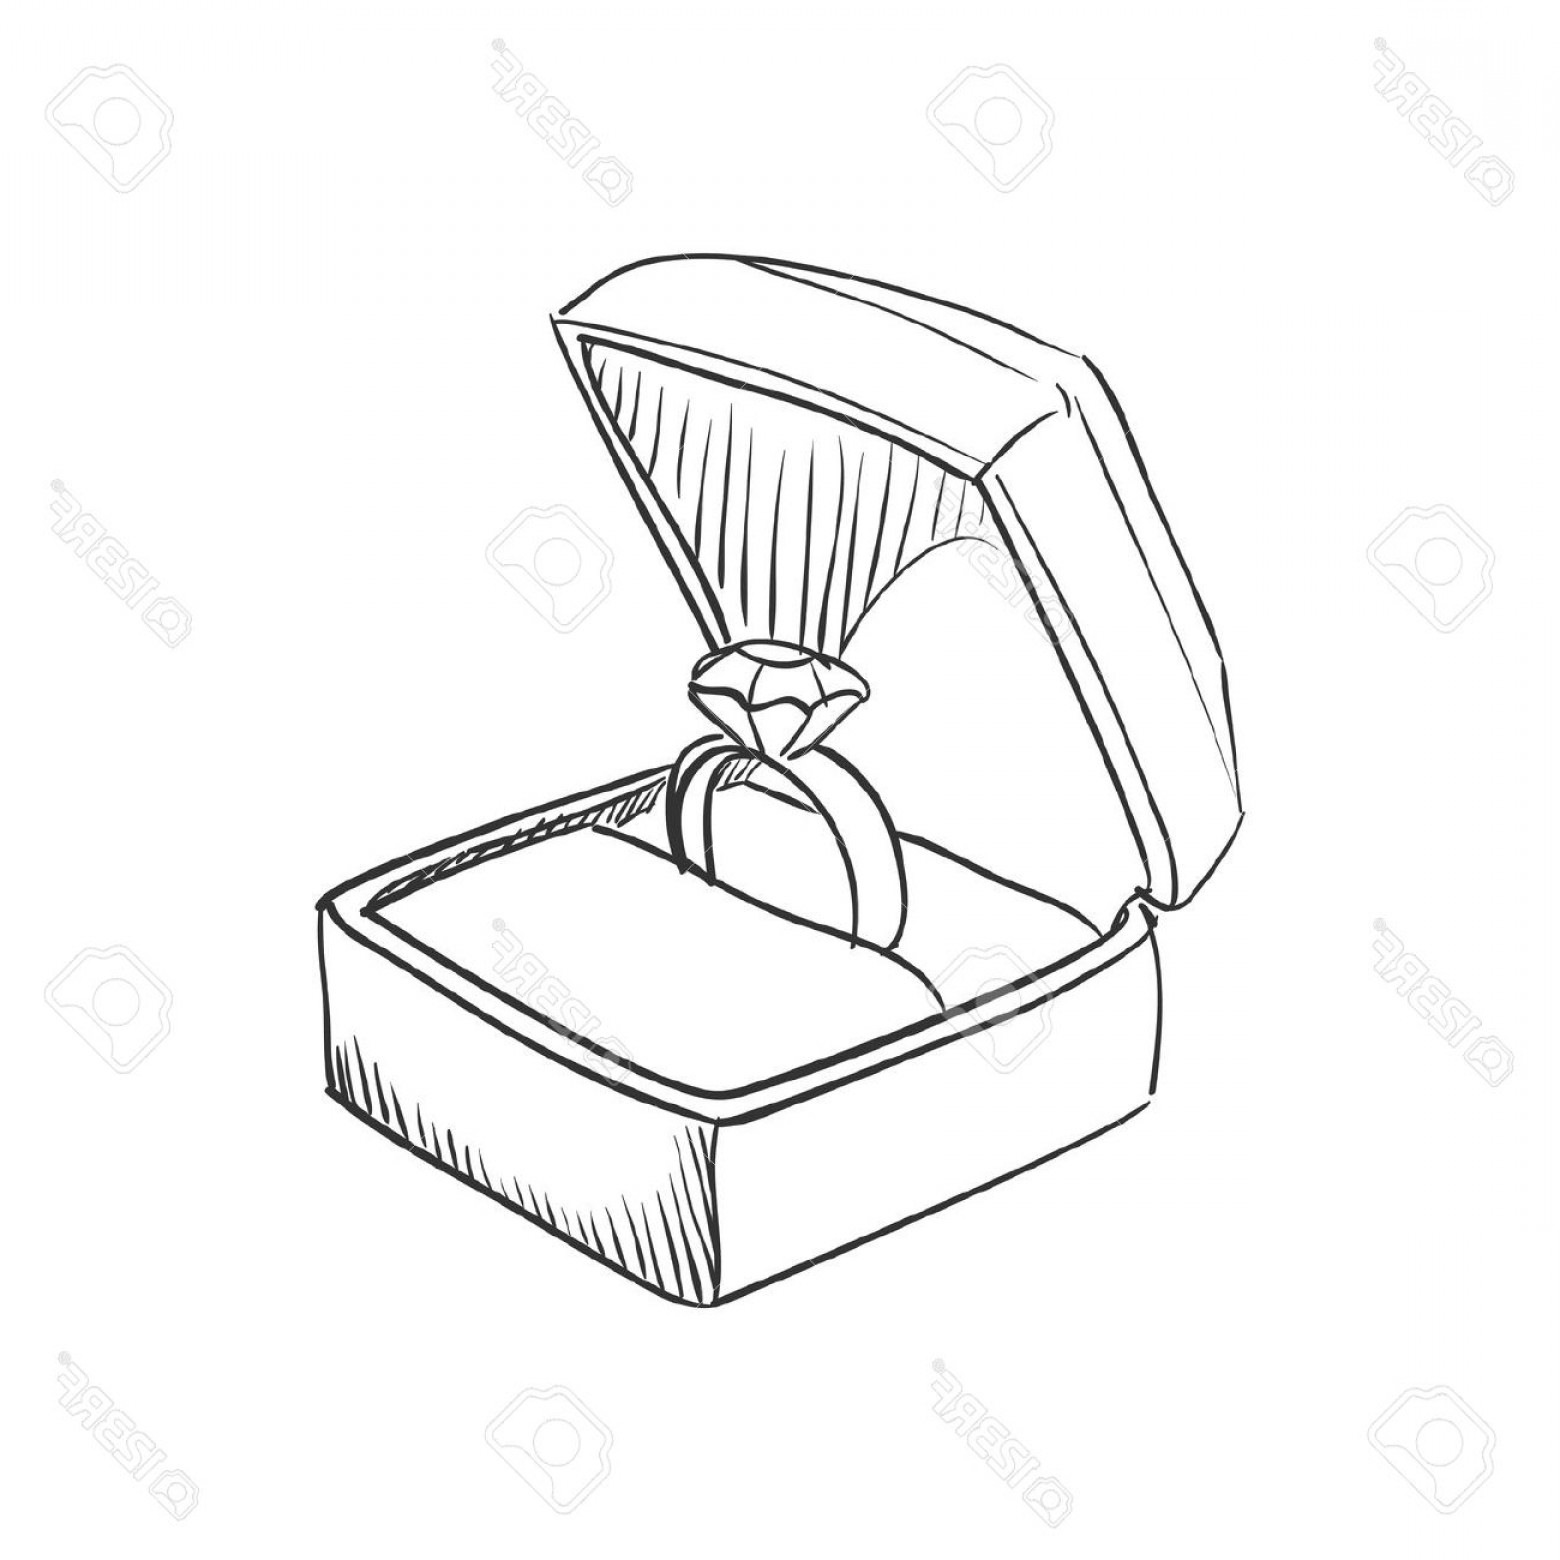 The best free Wedding ring drawing images. Download from 3826 free